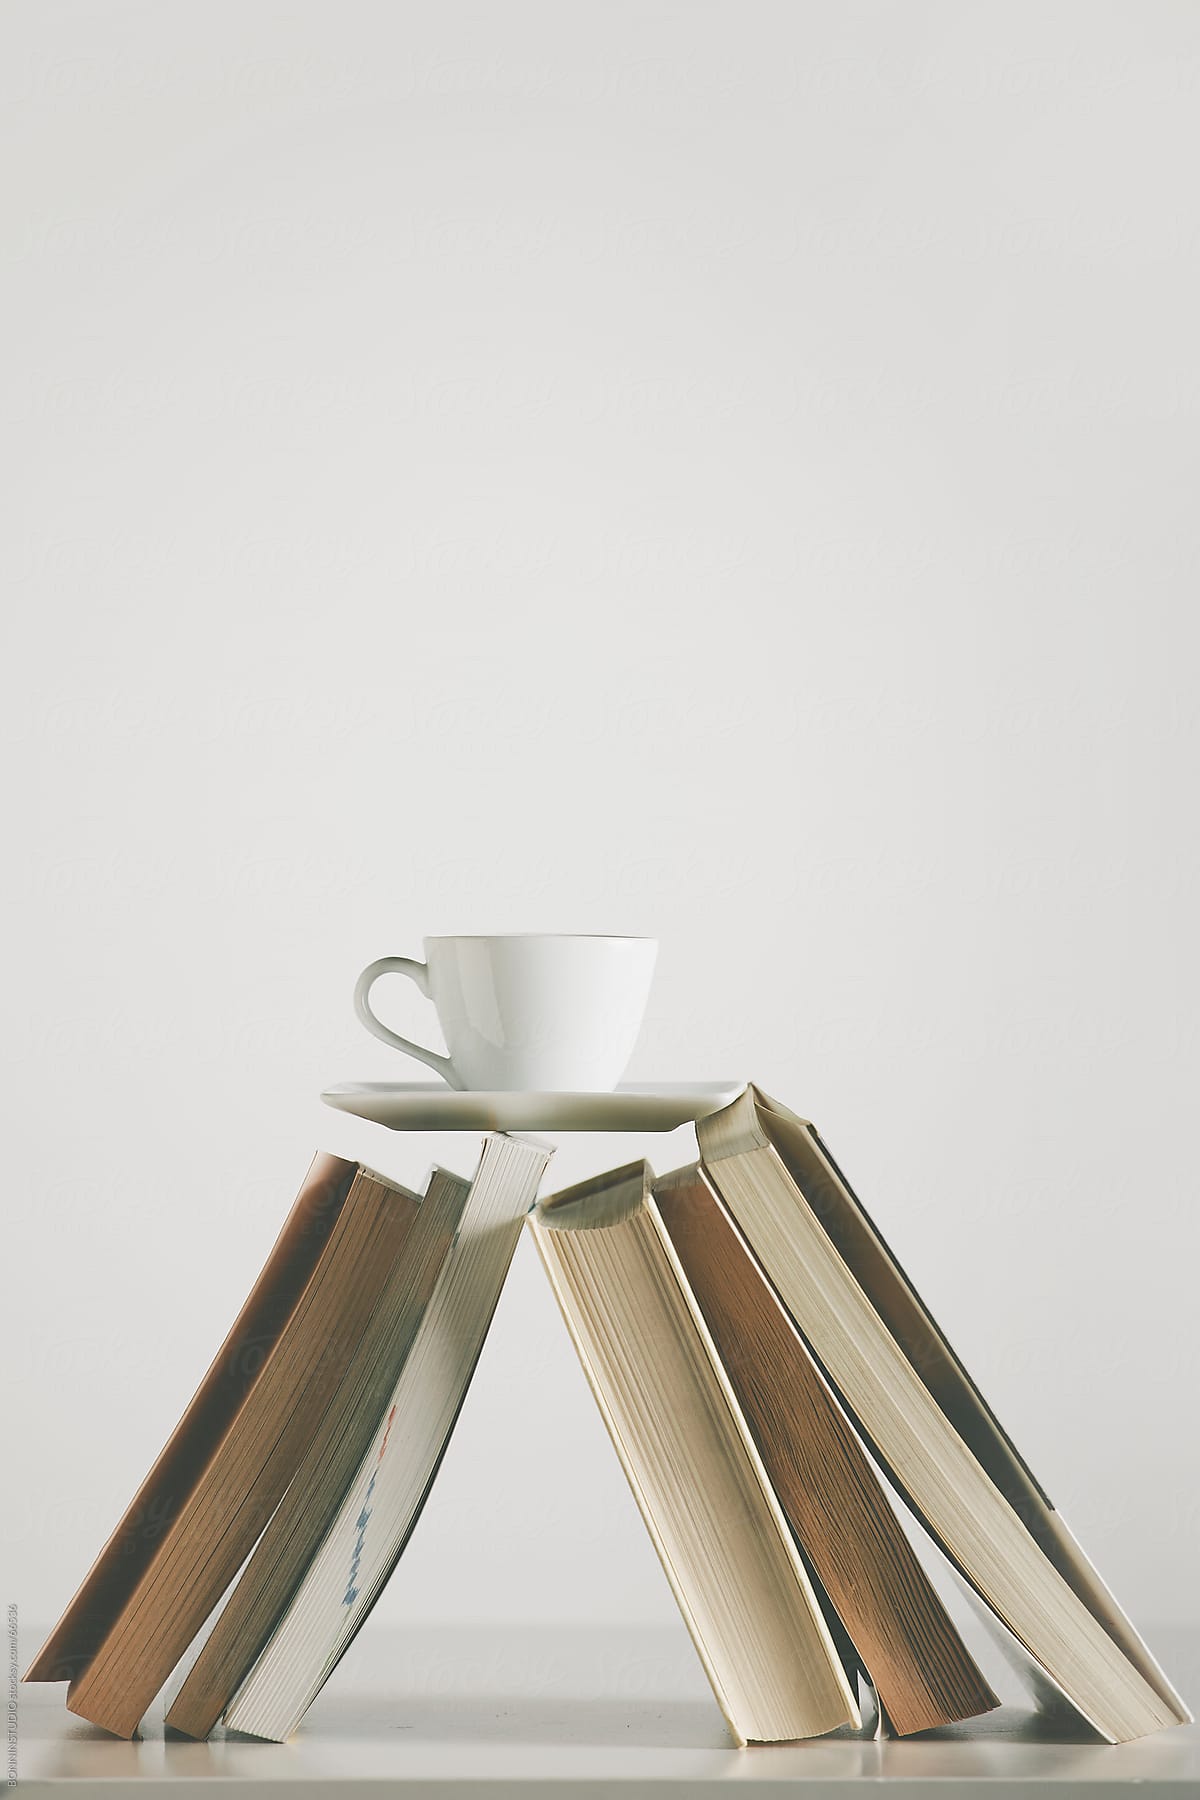 Coffee cup over a book on the table. White background.